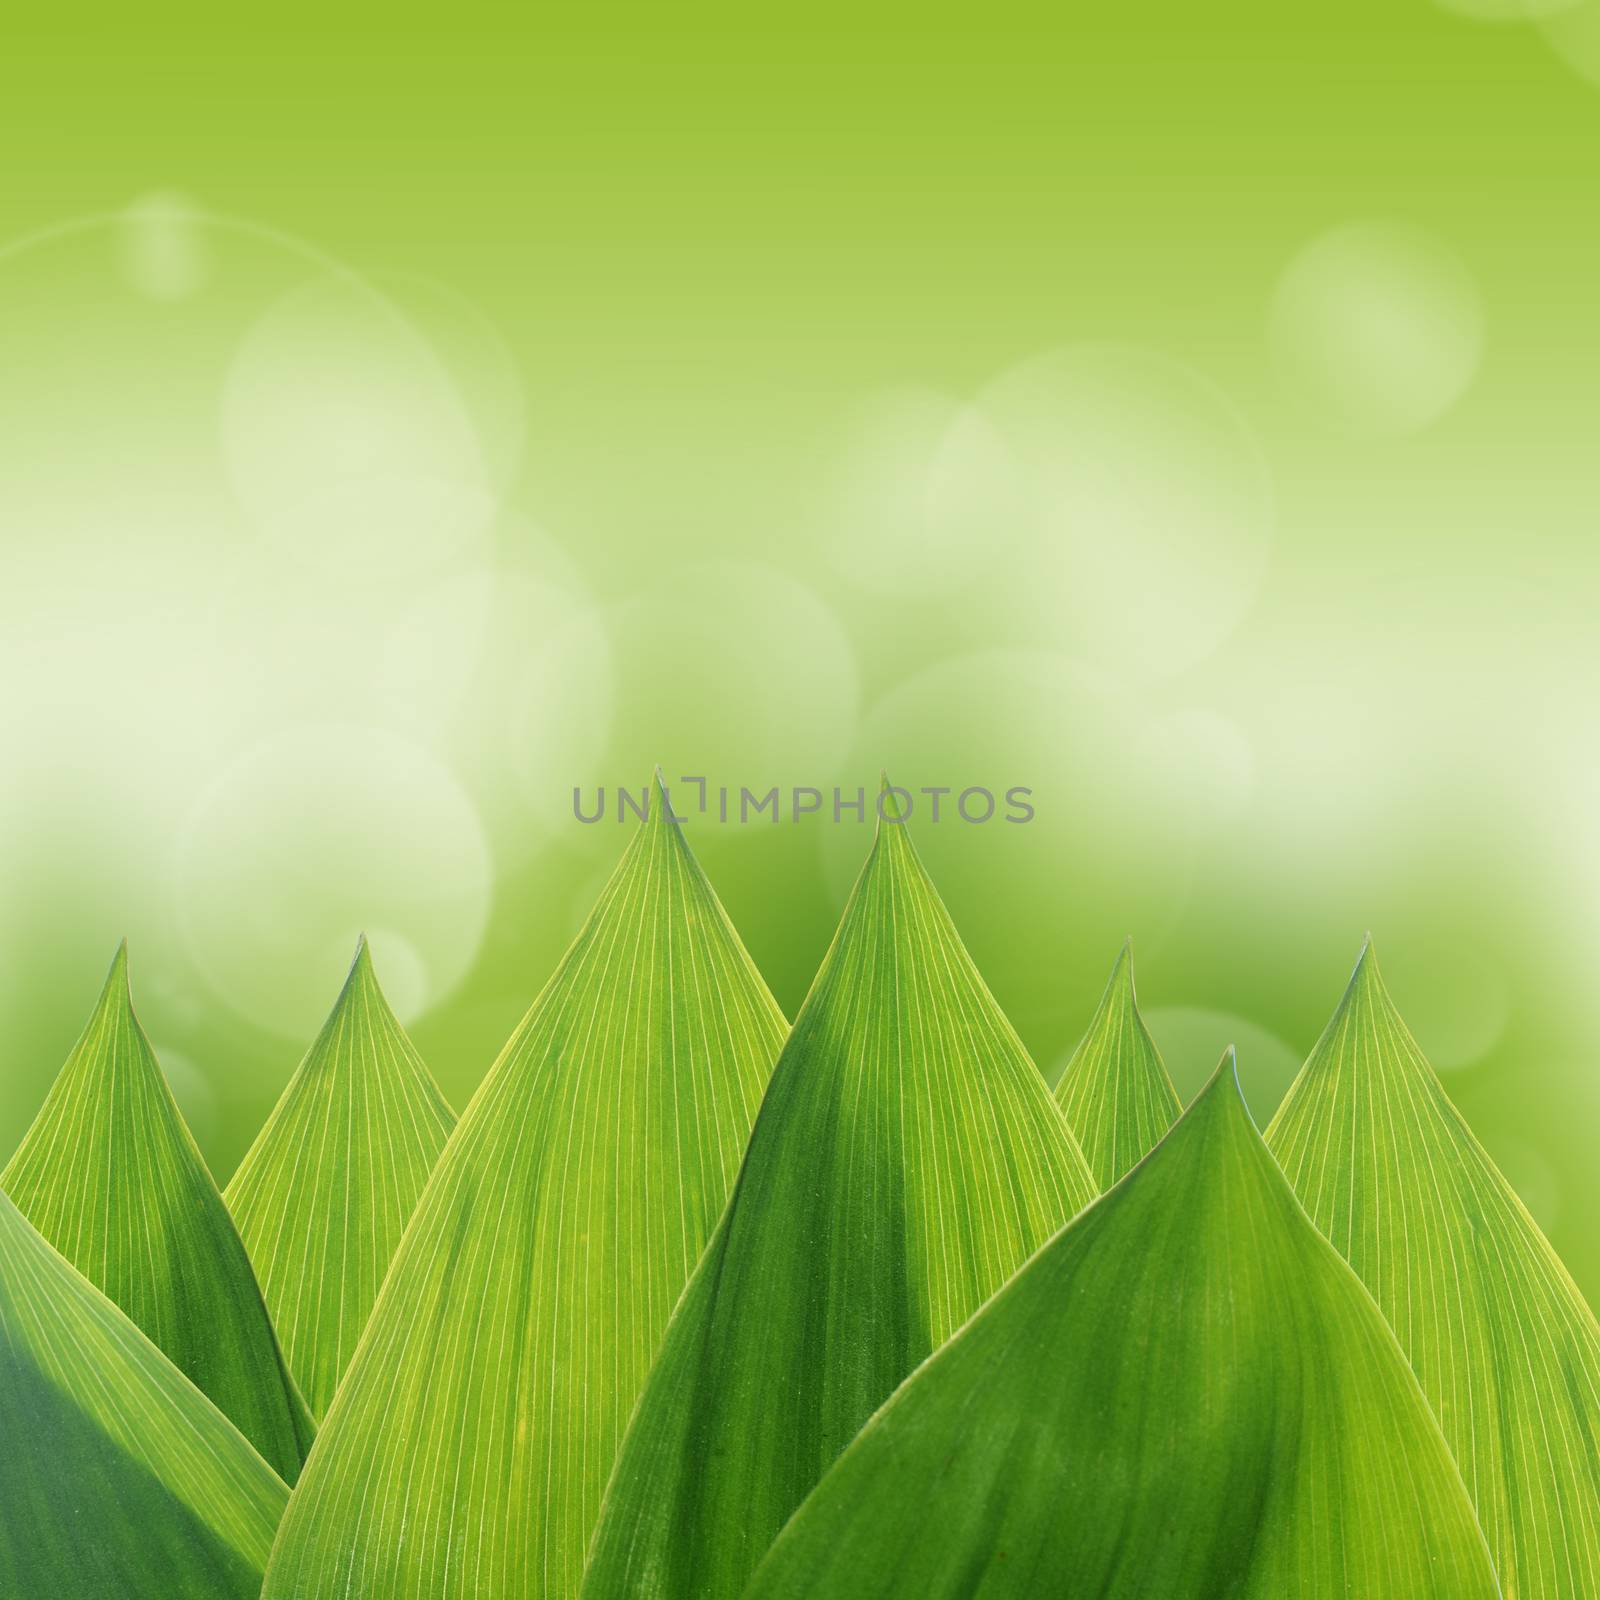 Green leaves of lily of the valley